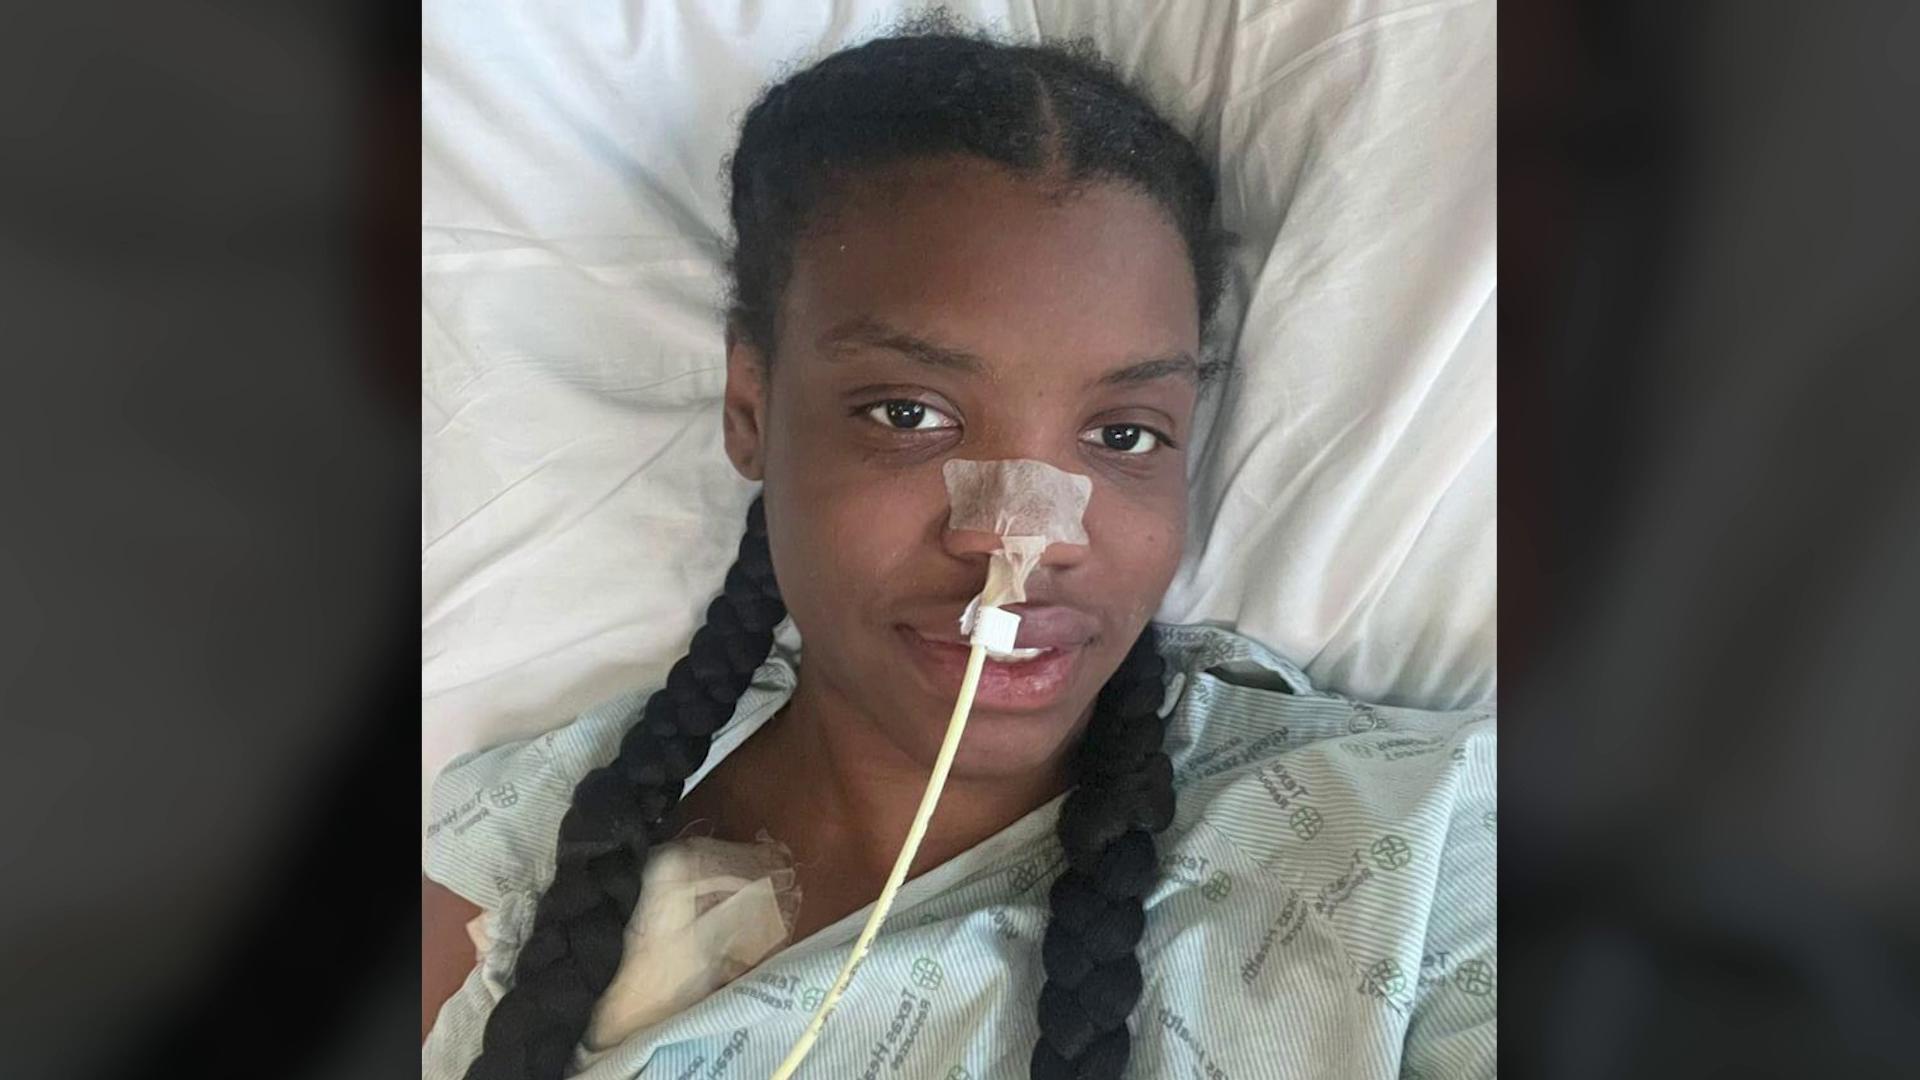 Mariah Smith spent eight days in the hospital and had her spleen, kidney, and part of her pancreas removed after being stabbed in the stomach at Kroger on May 1.